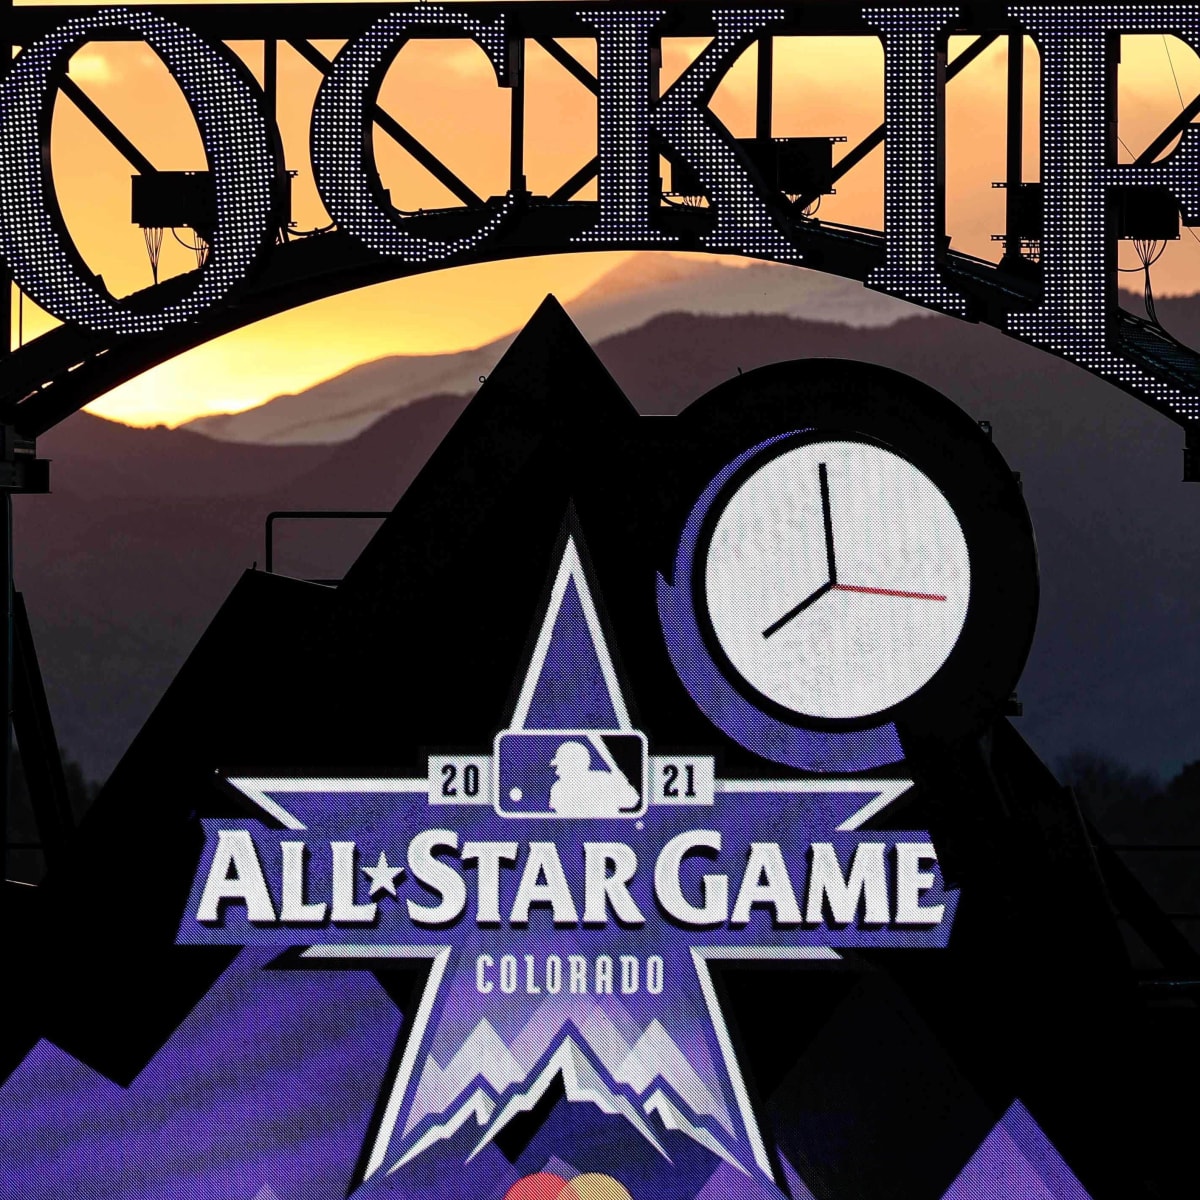 2021 MLB All Star Game logo unveiled by Braves